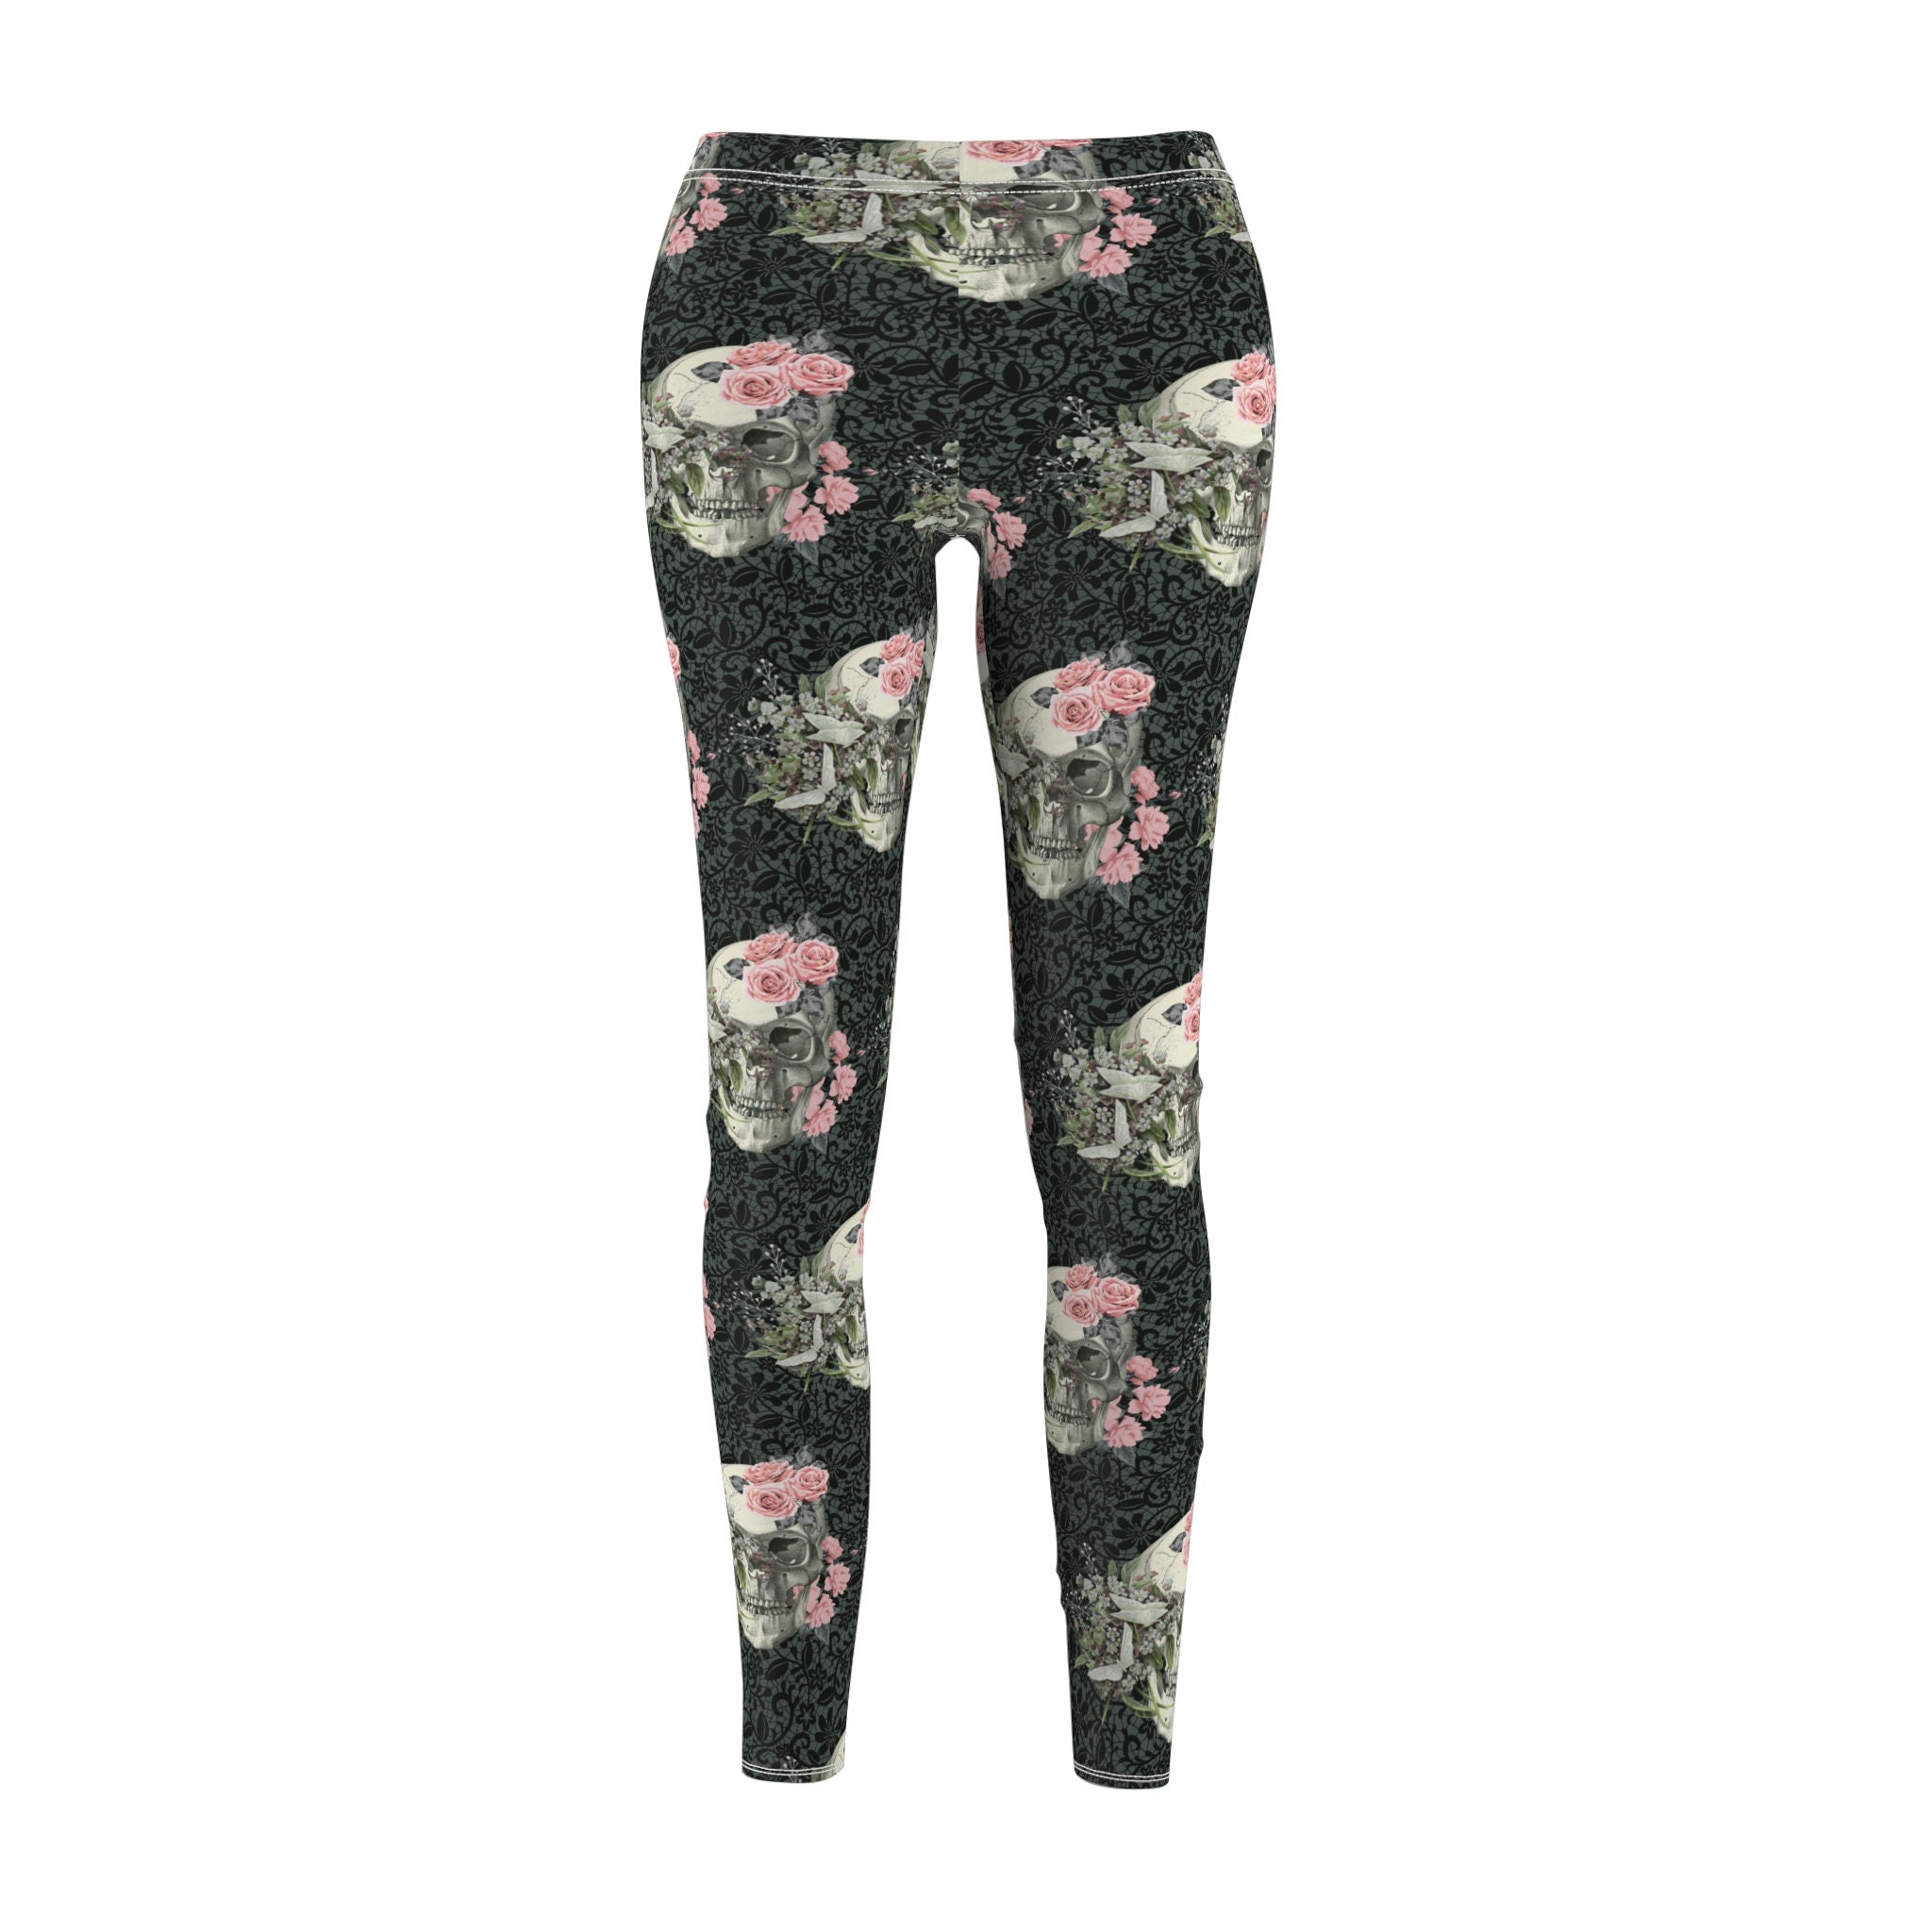 Daisies and Skulls Leggings for Women Mid Waist Pants with Daisy